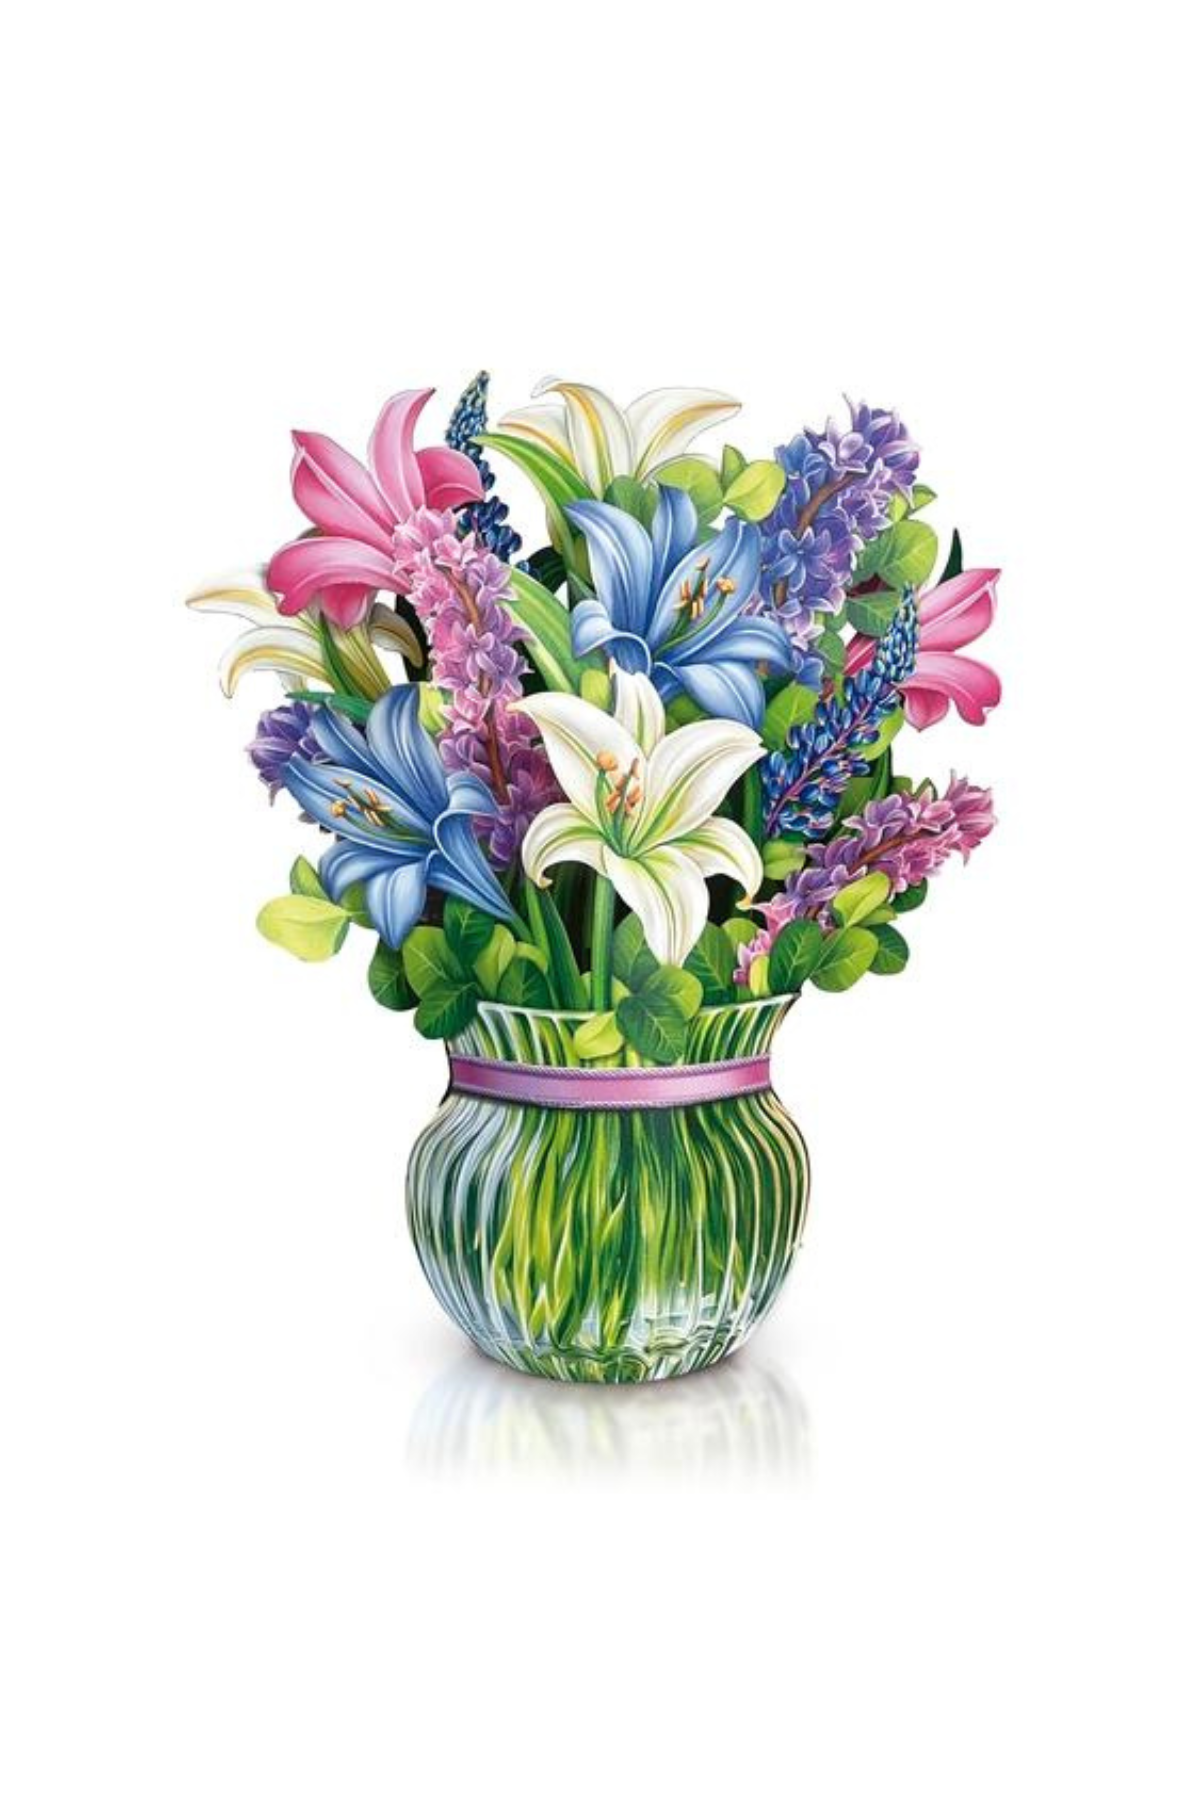 Lilies & Lupines Paper Bouquet Pop Up Greeting Card